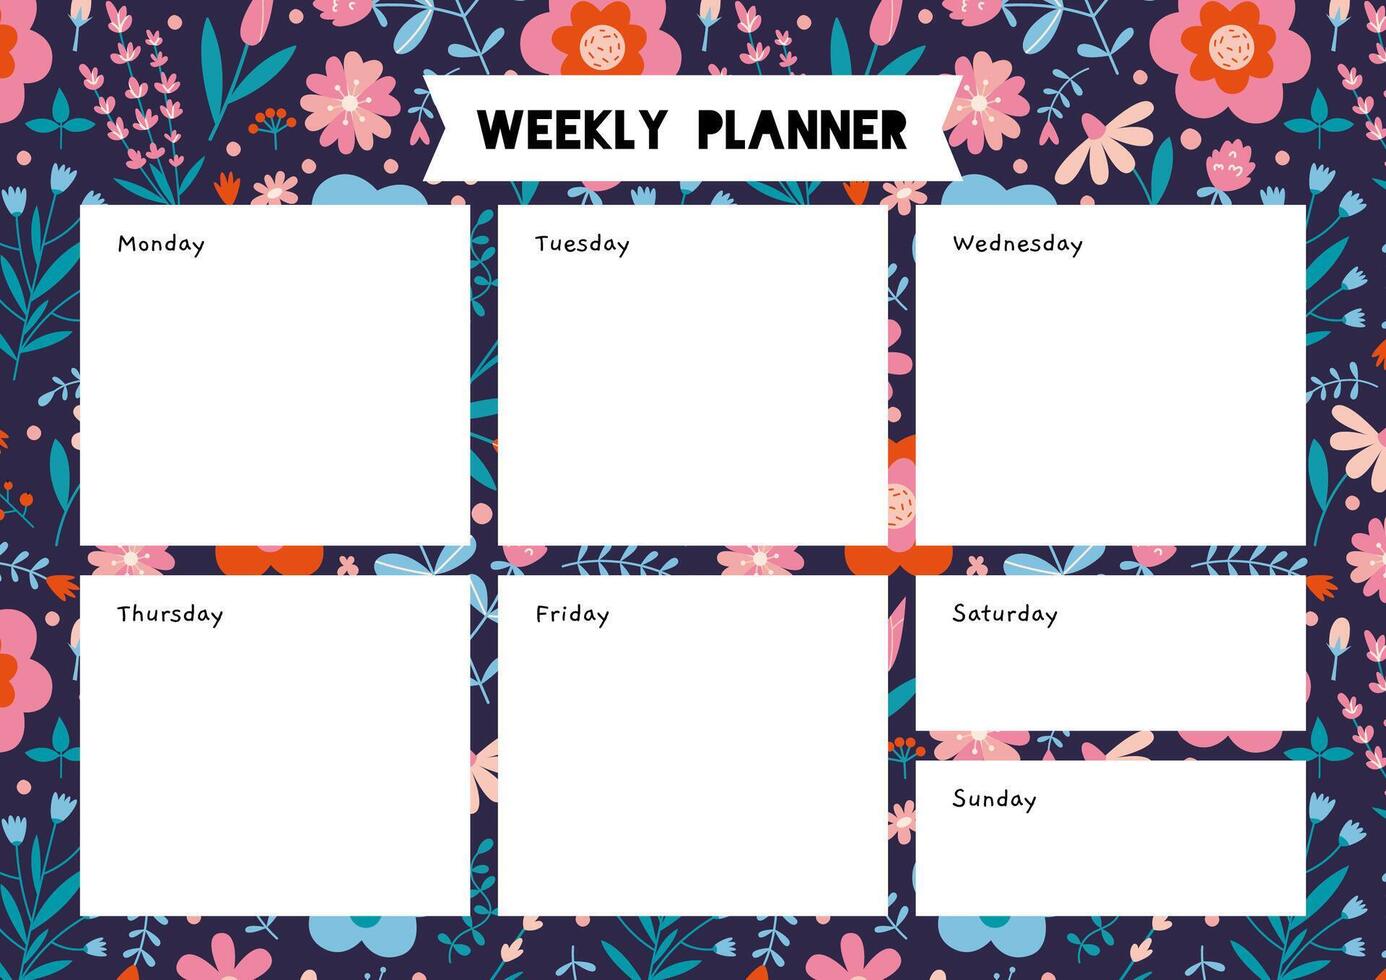 Cute weekly planner template with spring vibe and flower pattern, cartoon style. Trendy modern vector illustration, hand drawn, flat